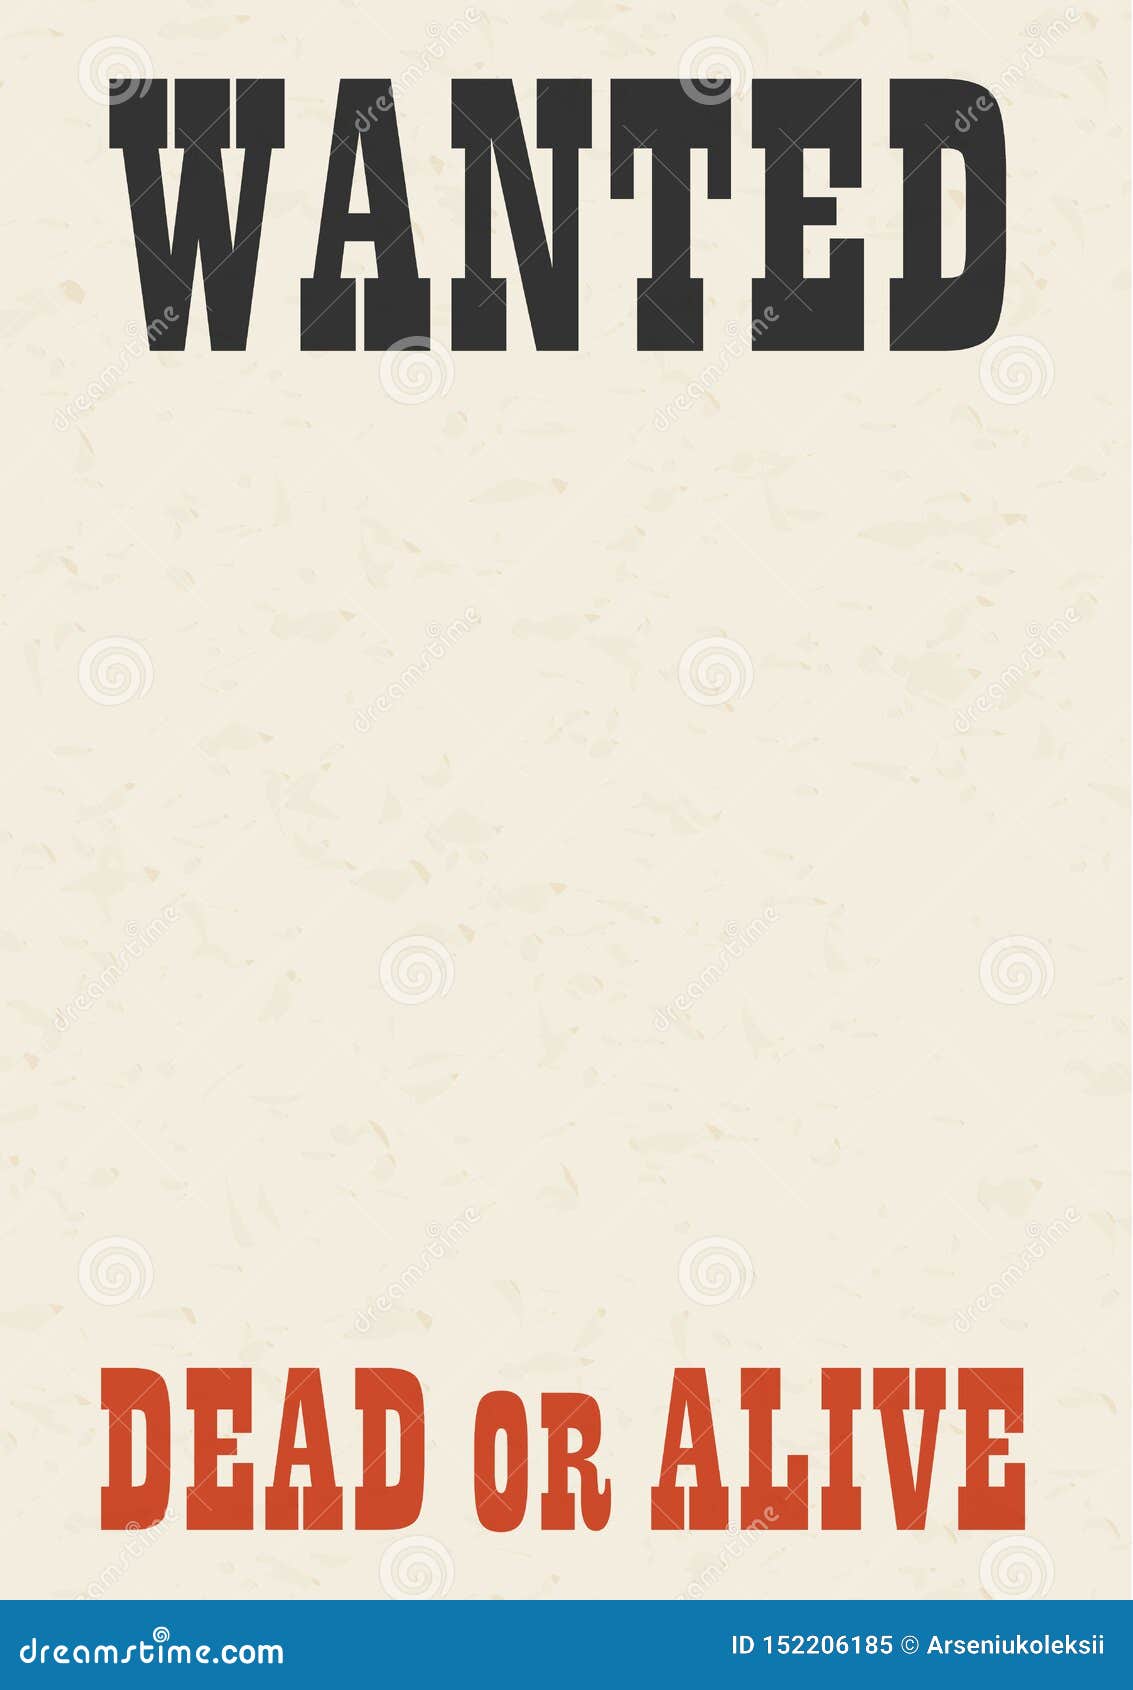 Wanted Dead or Alive Poster Stock Vector - Illustration of background